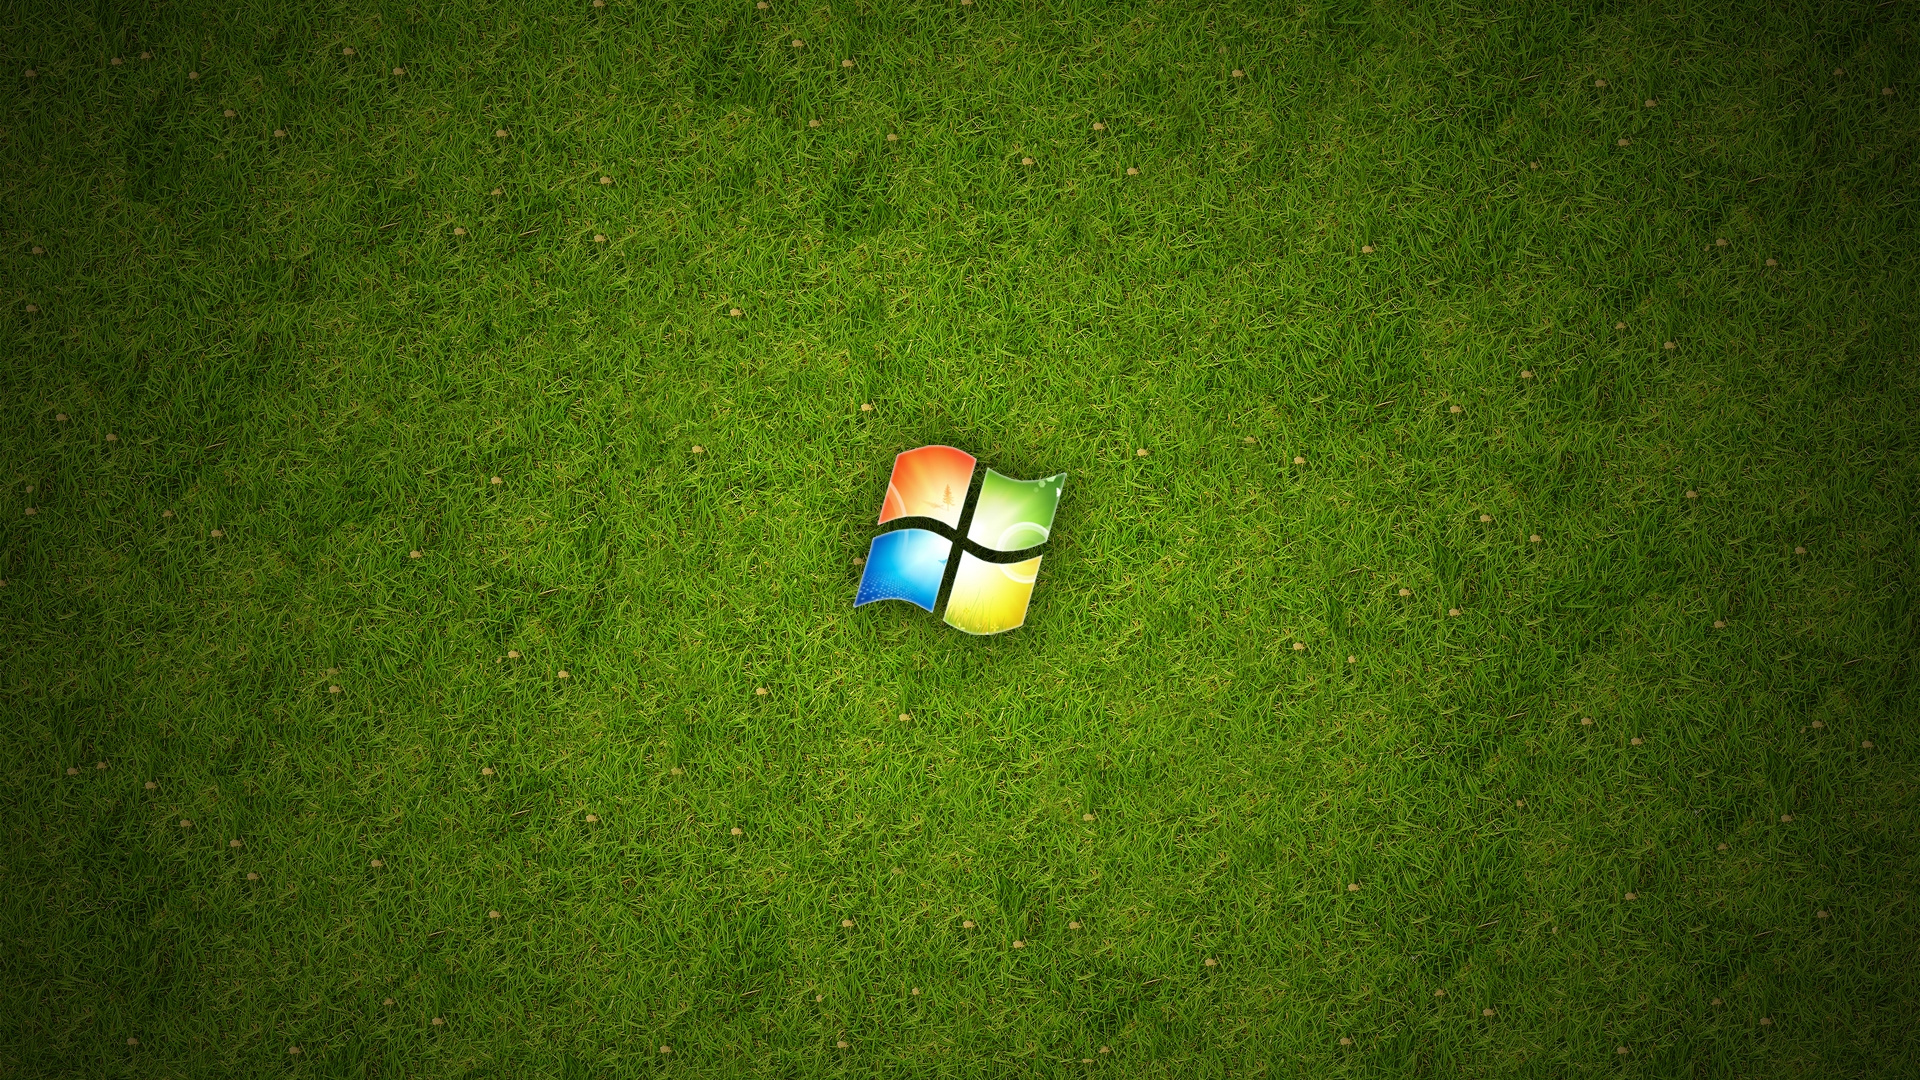 Windows xp Full HD, HDTV, 1080p 16:9 Wallpapers, HD Windows xp 1920x1080  Backgrounds, Free Images Download